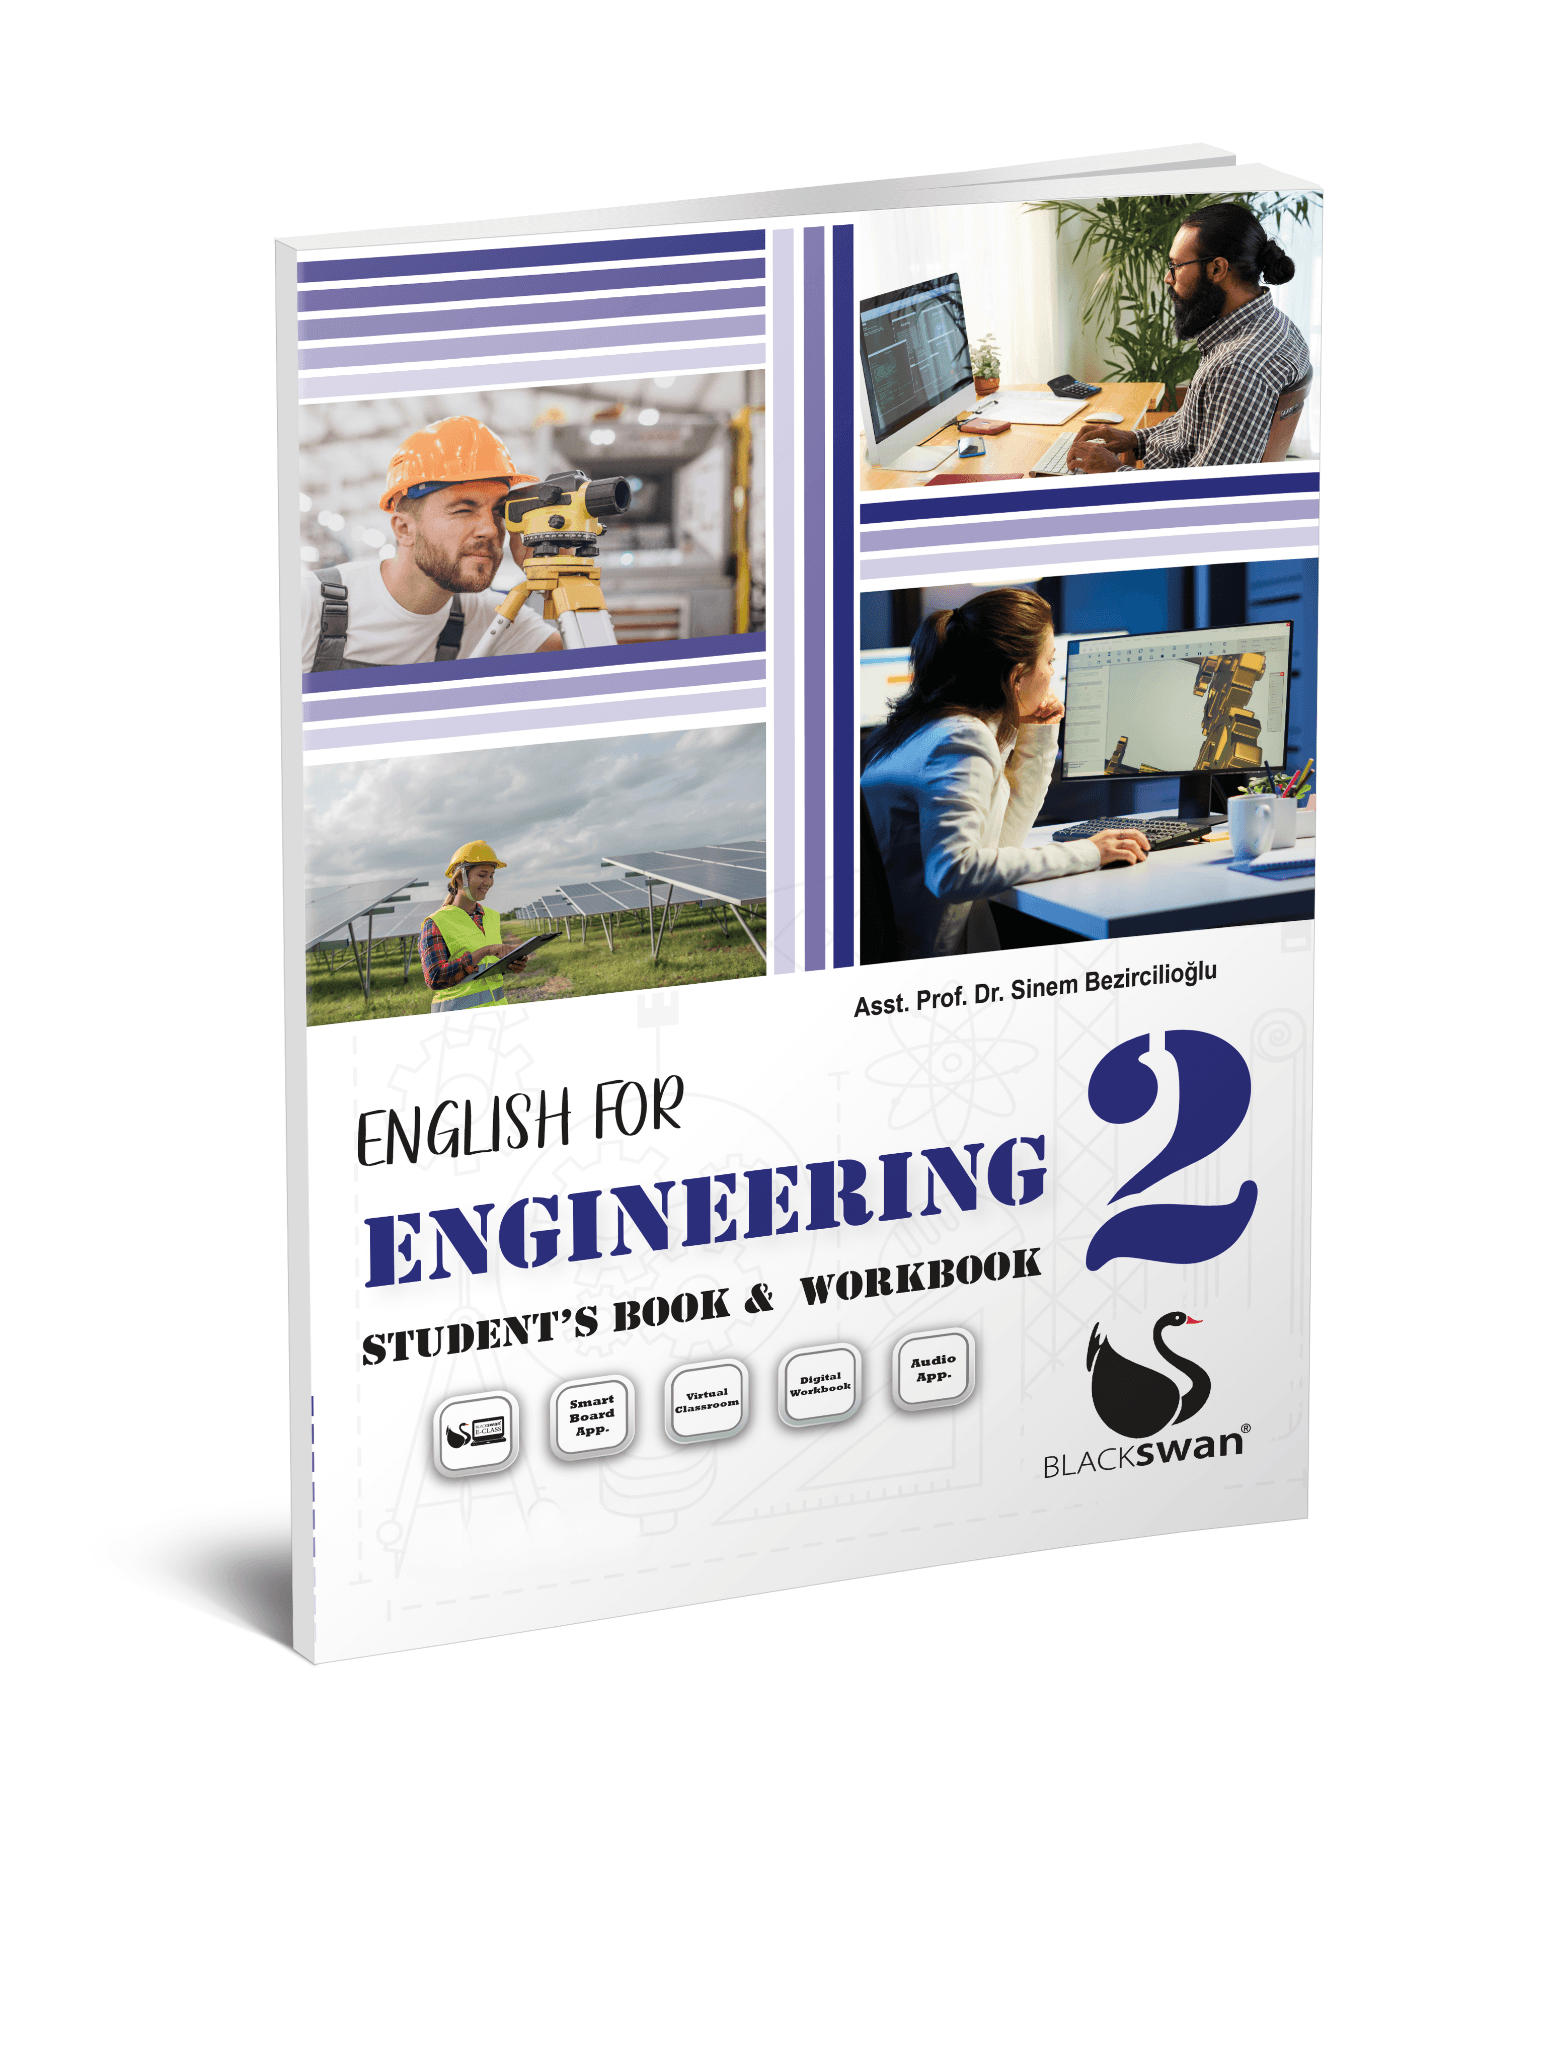 English for Engineering 2 Student's Book & Workbook